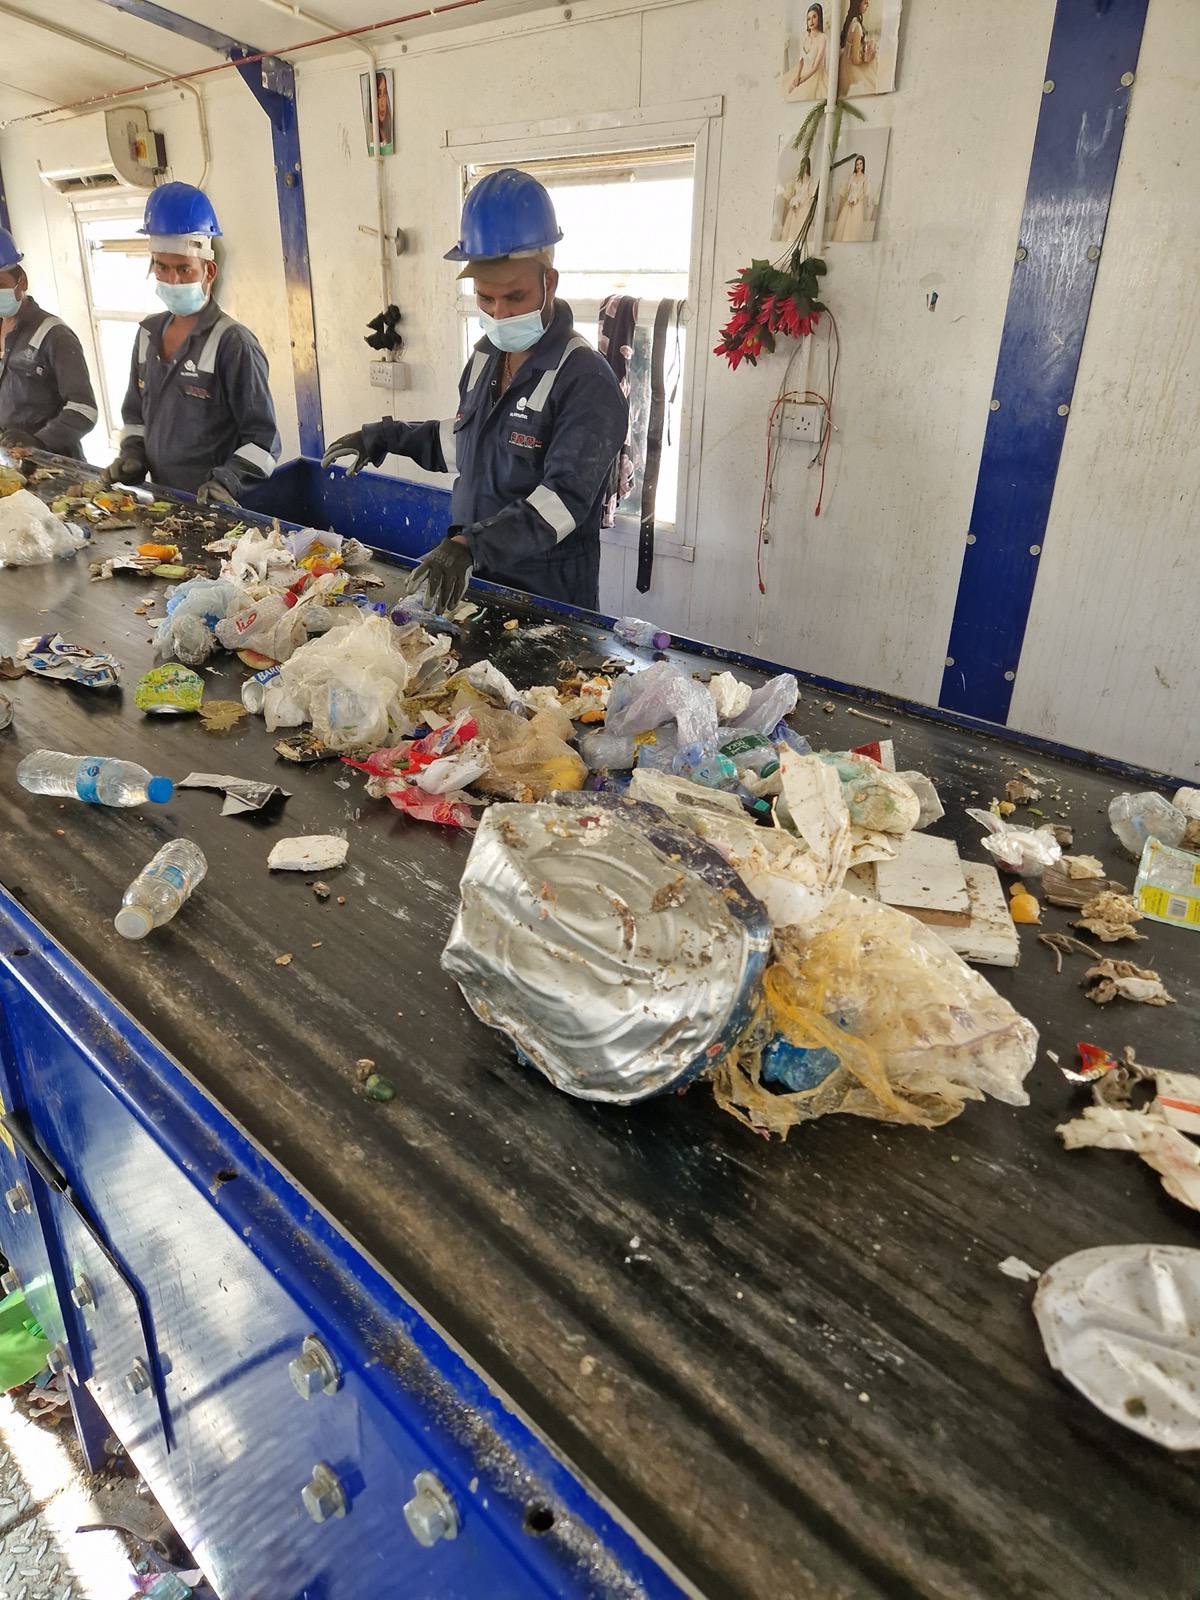 Workers sorting recyclable materials at Marat RDF facility